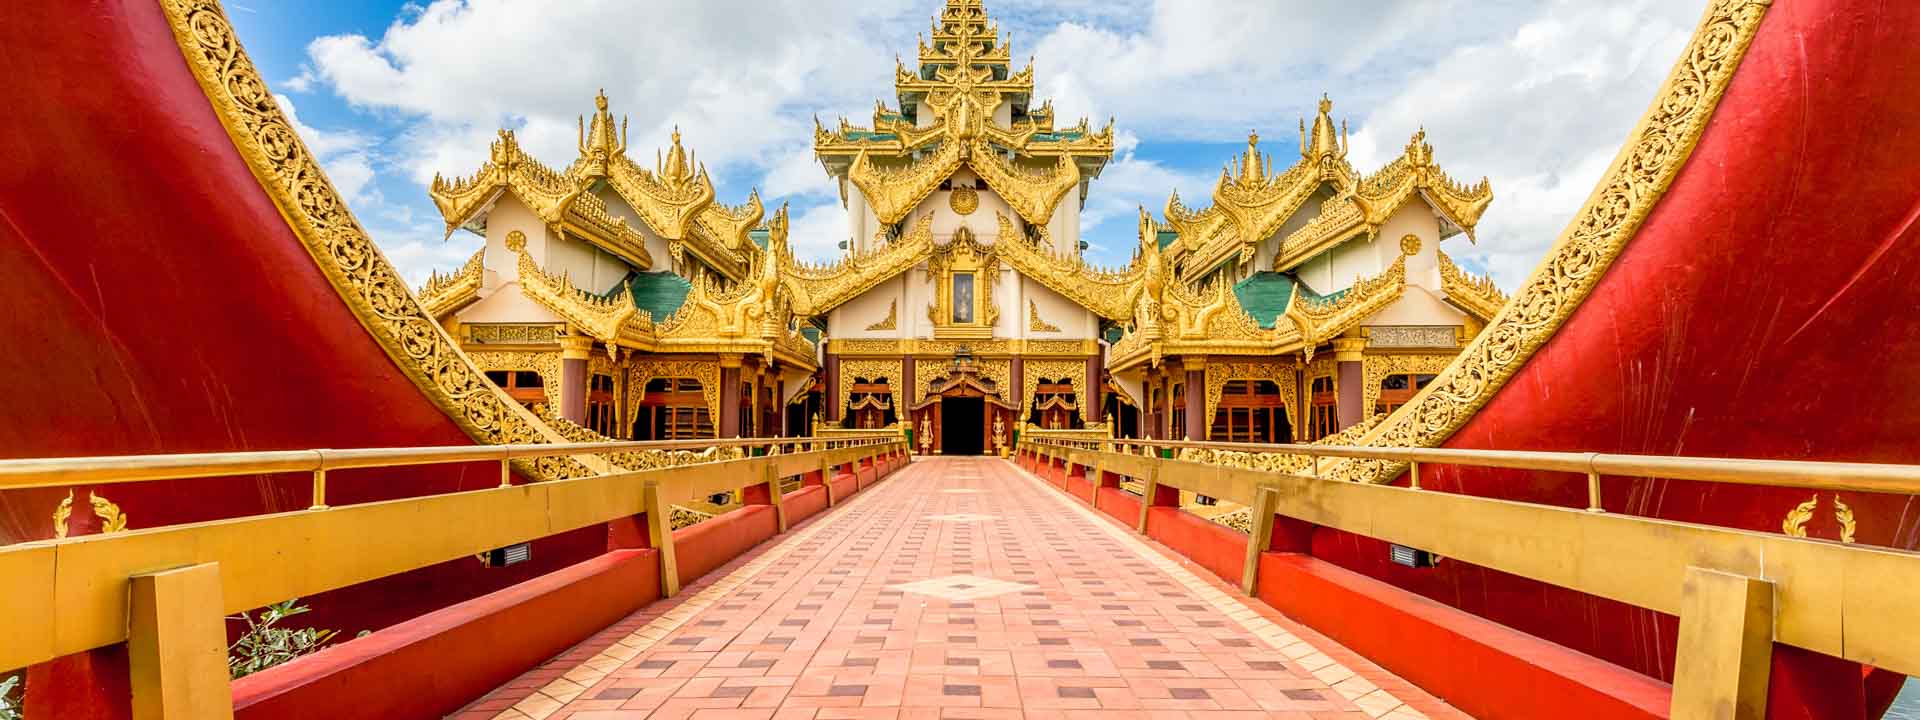 Discover Yangon in Depth on 5 days